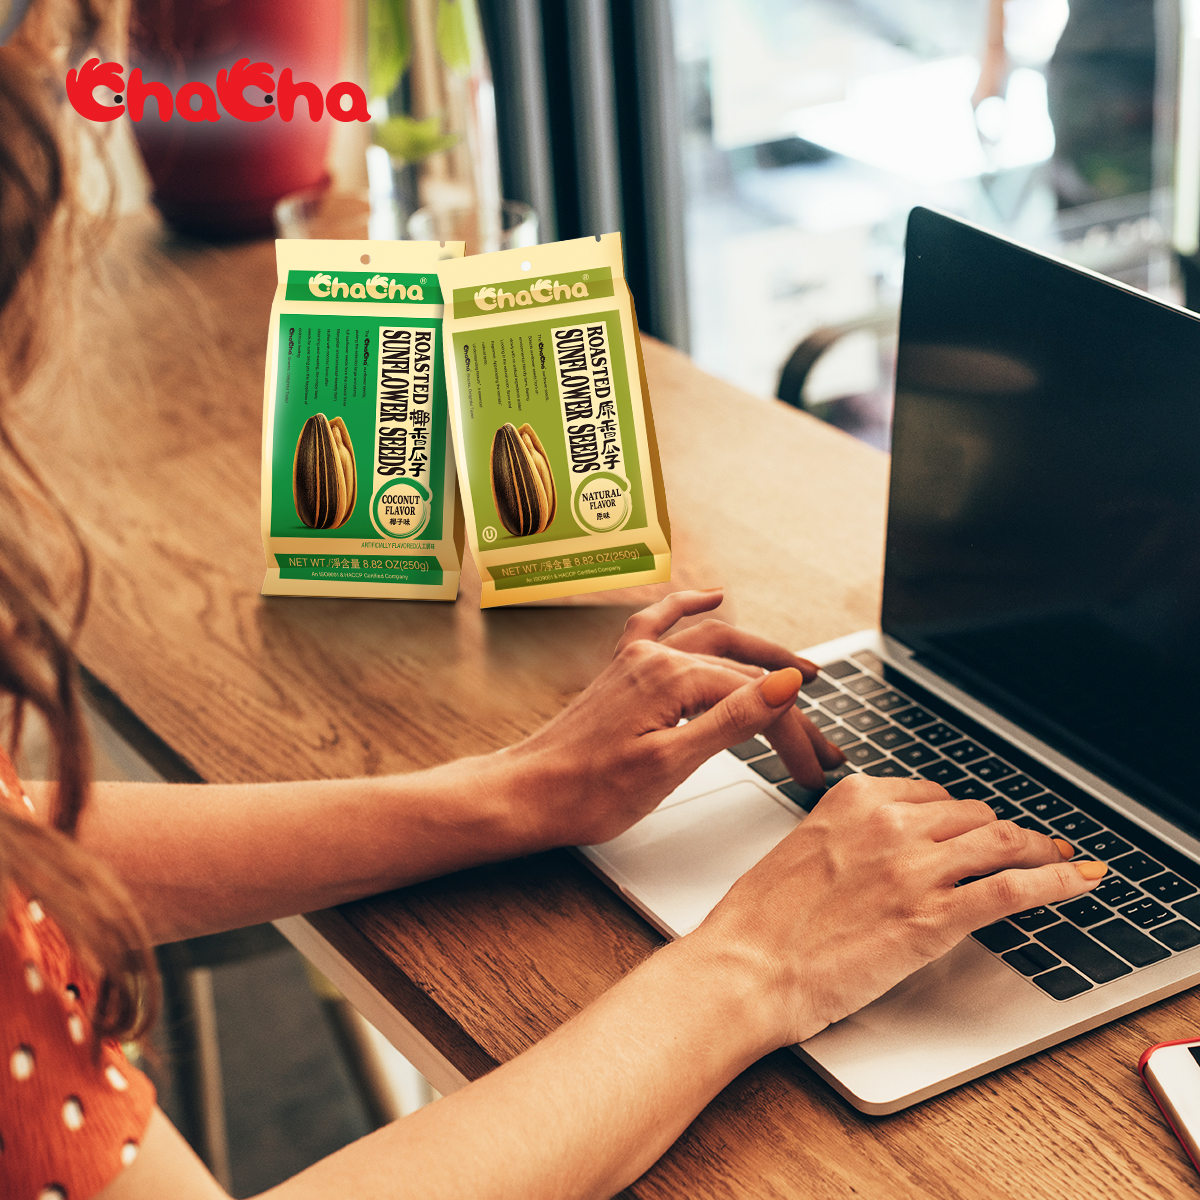 #ChaChaYummy 💁Did you know? Sunflower seeds can reduce anxiety?
Try some ChaCha when you feel anxious at work, you will feel much more relaxed.
#ChaChaMoment